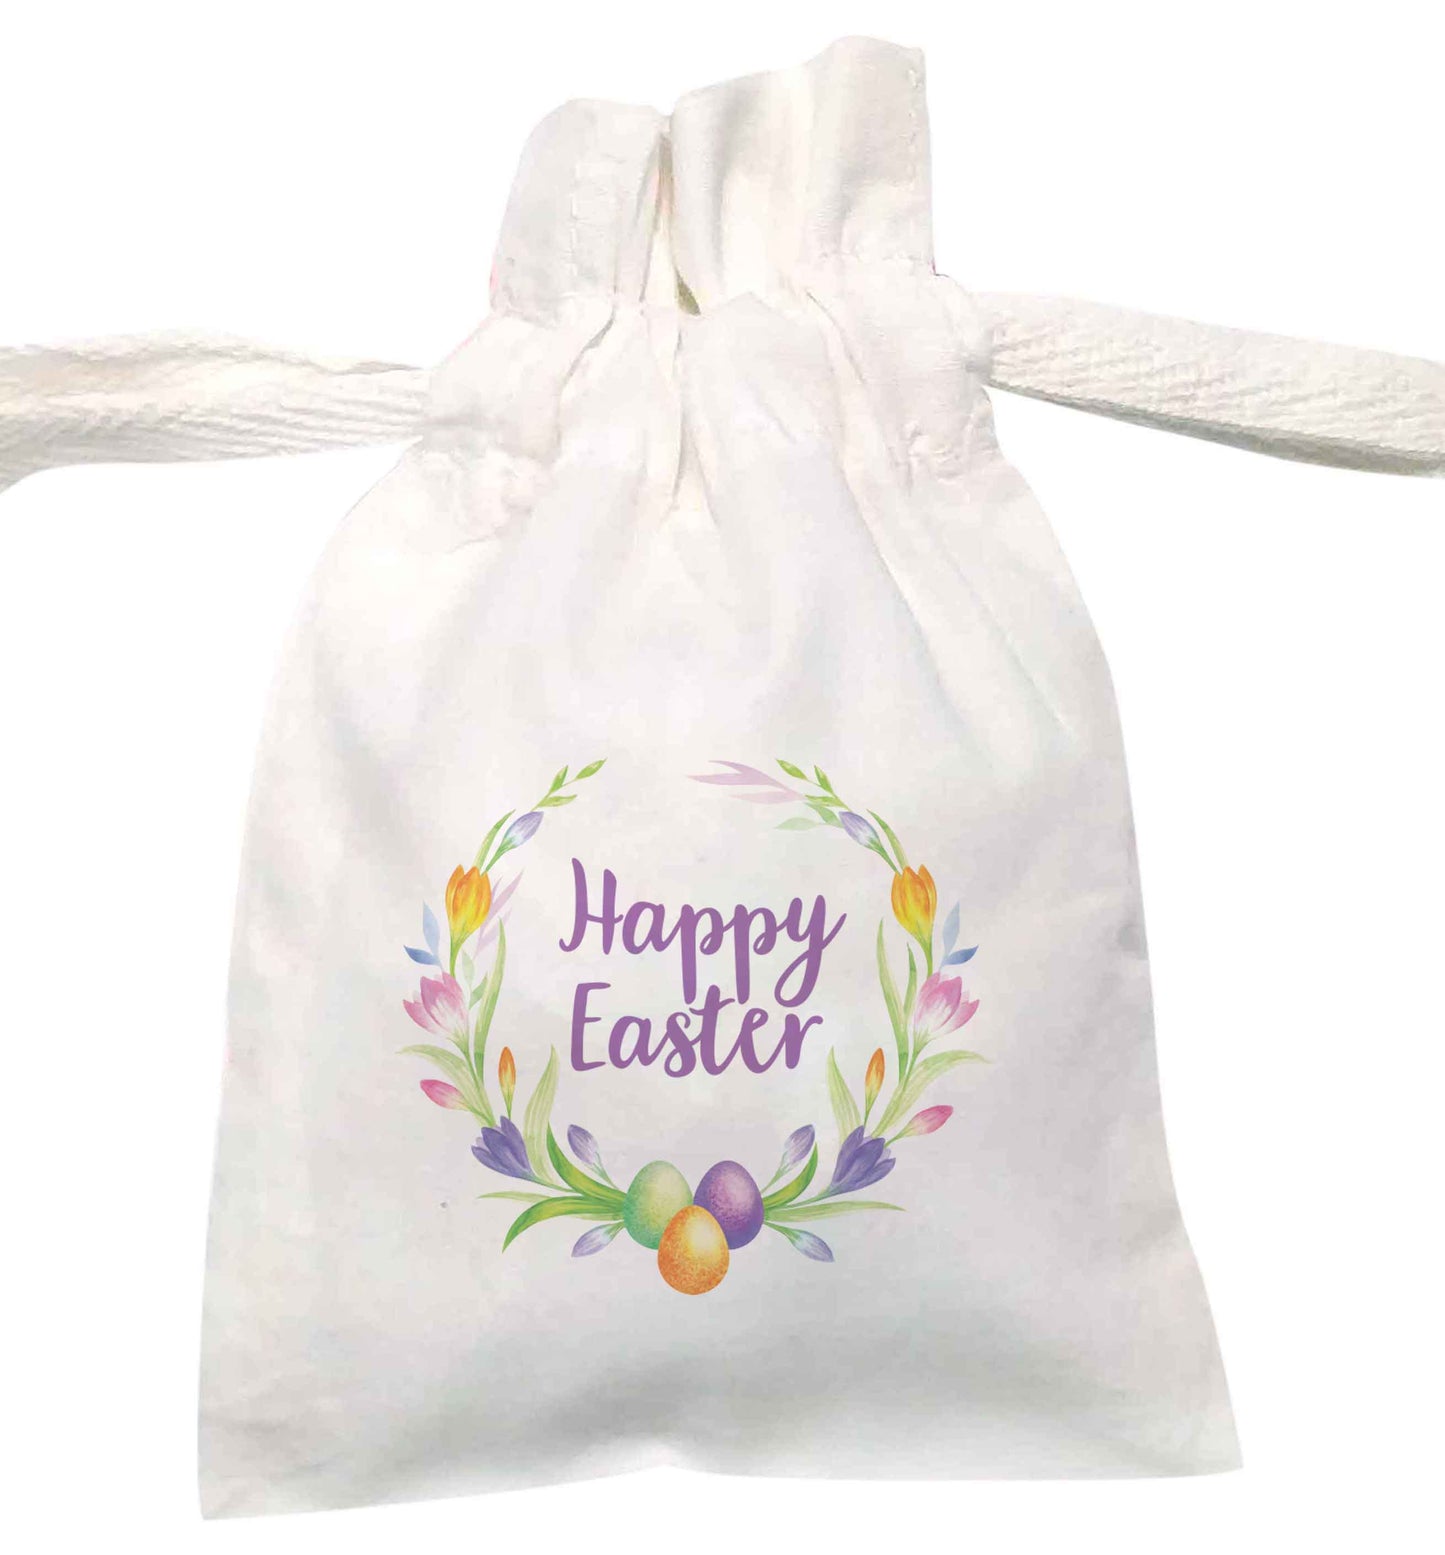 Happy Easter floral wreath | XS - L | Pouch / Drawstring bag / Sack | Organic Cotton | Bulk discounts available!